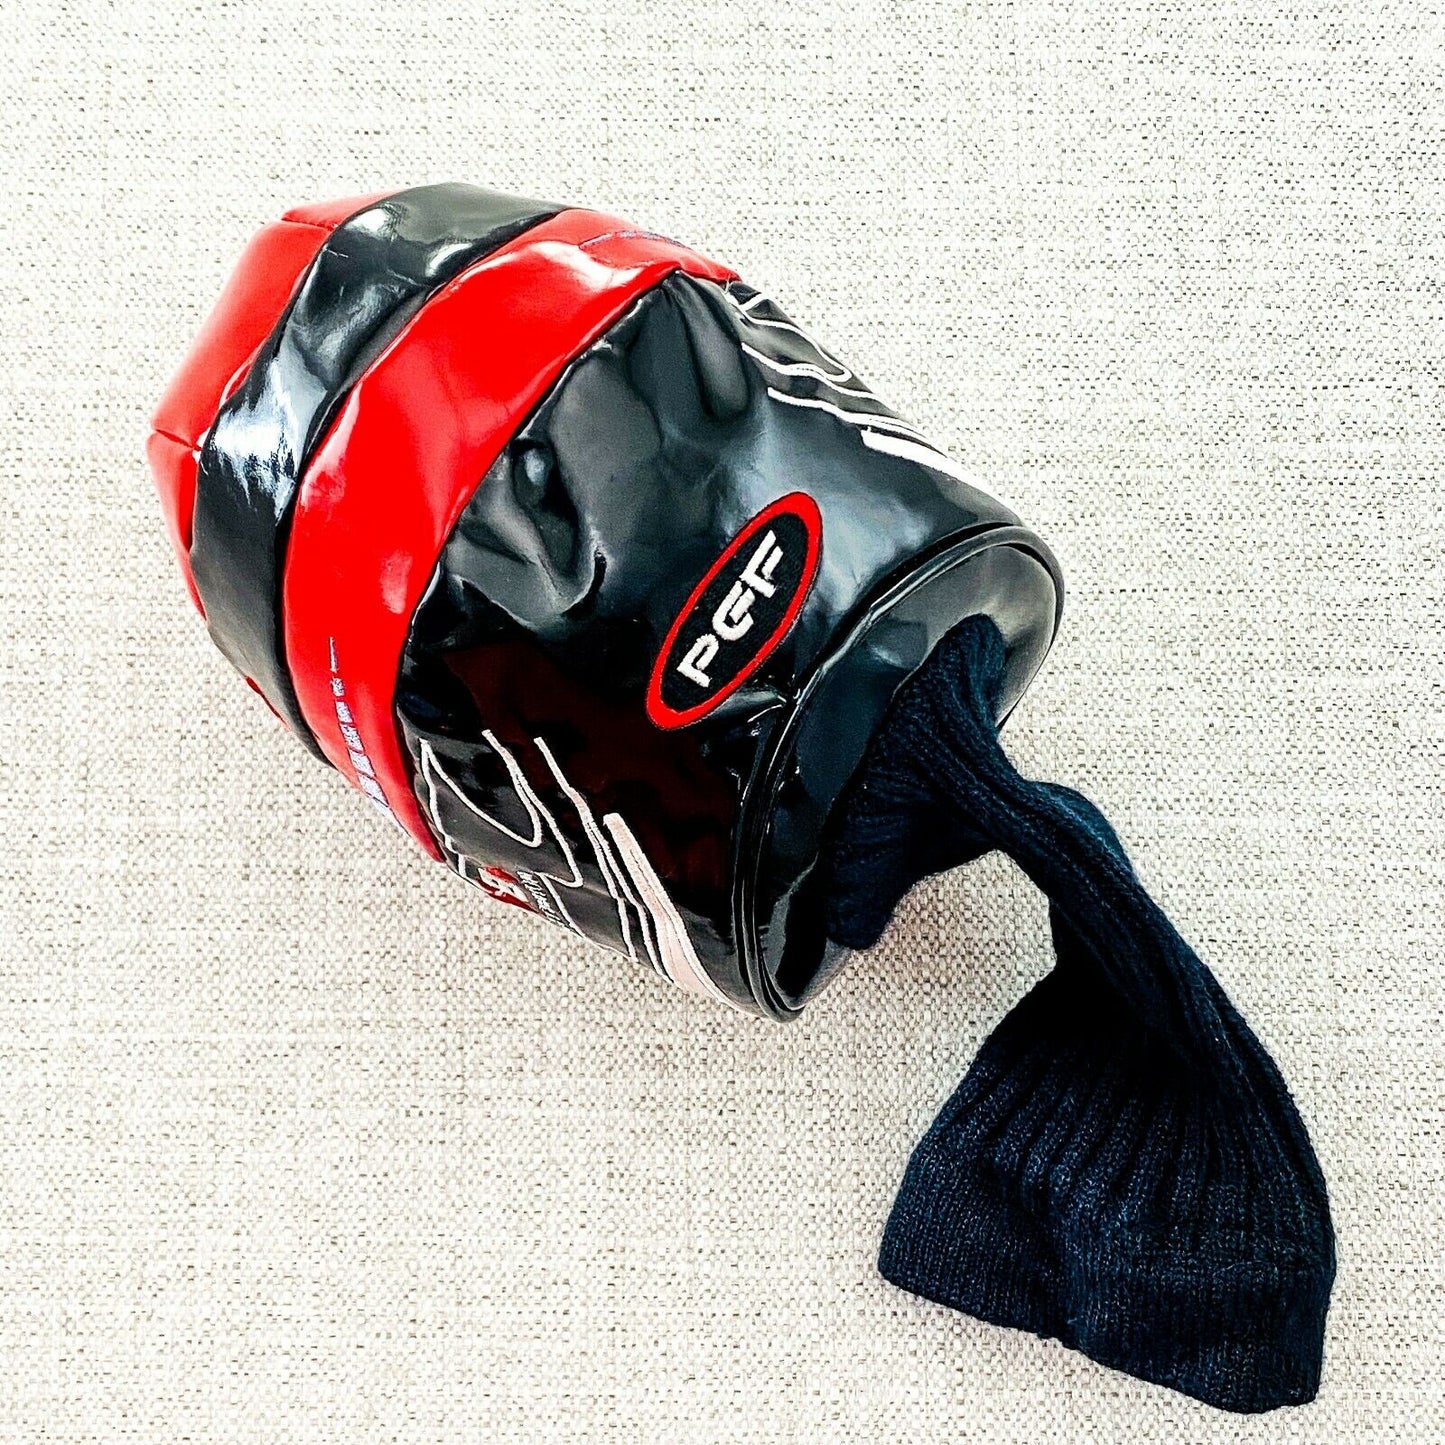 PGF V8 Driver Head Cover. Excellent Condition